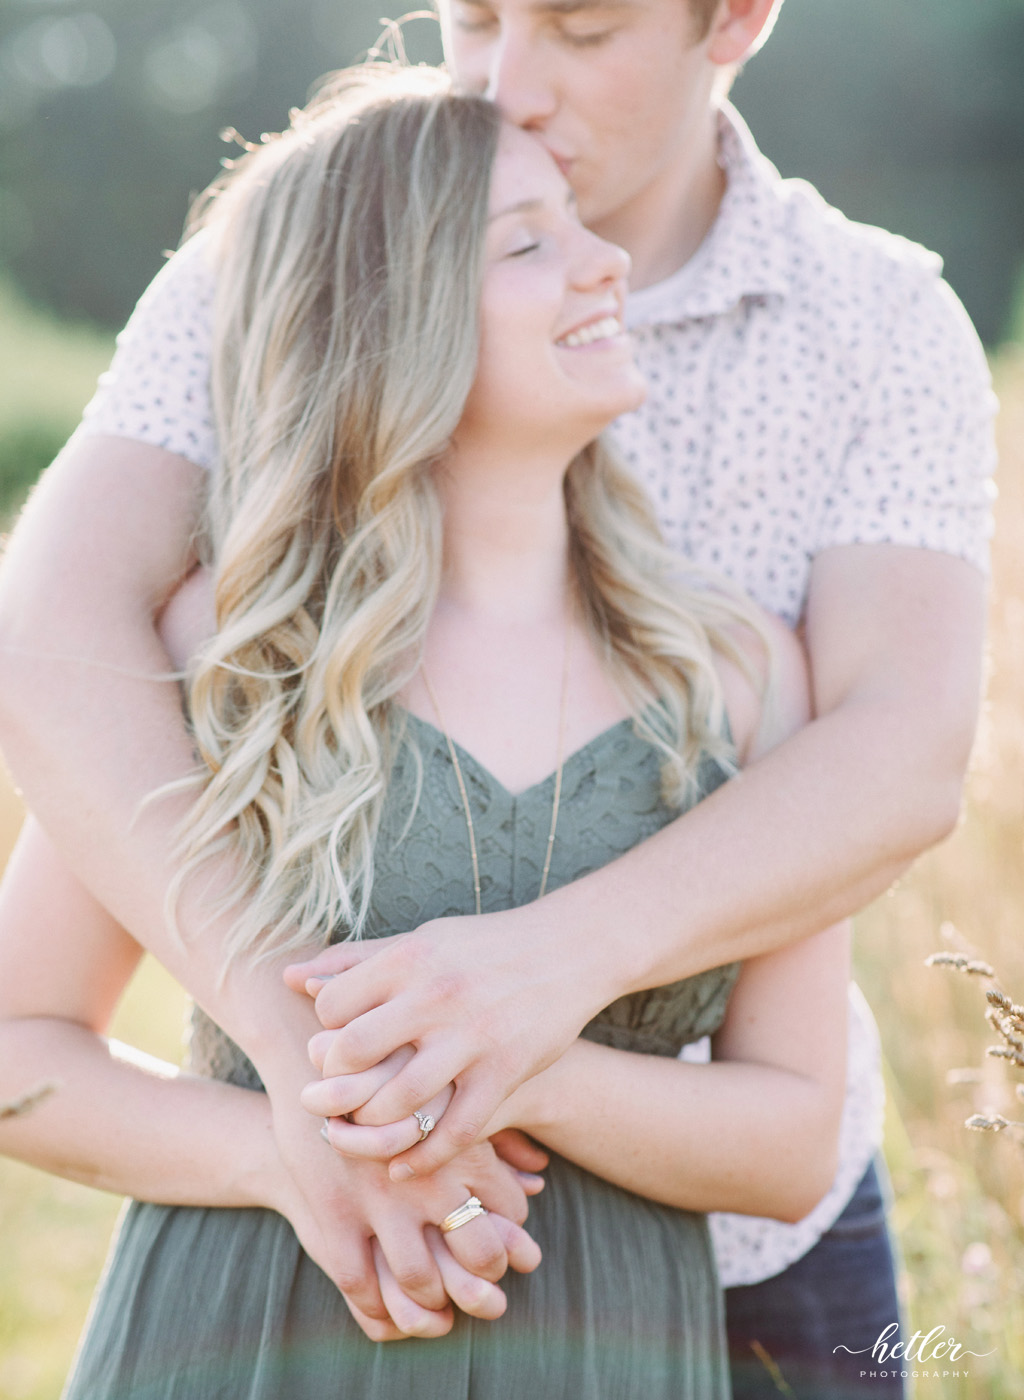 Grand Rapids engagement pics in a field of wildflowers